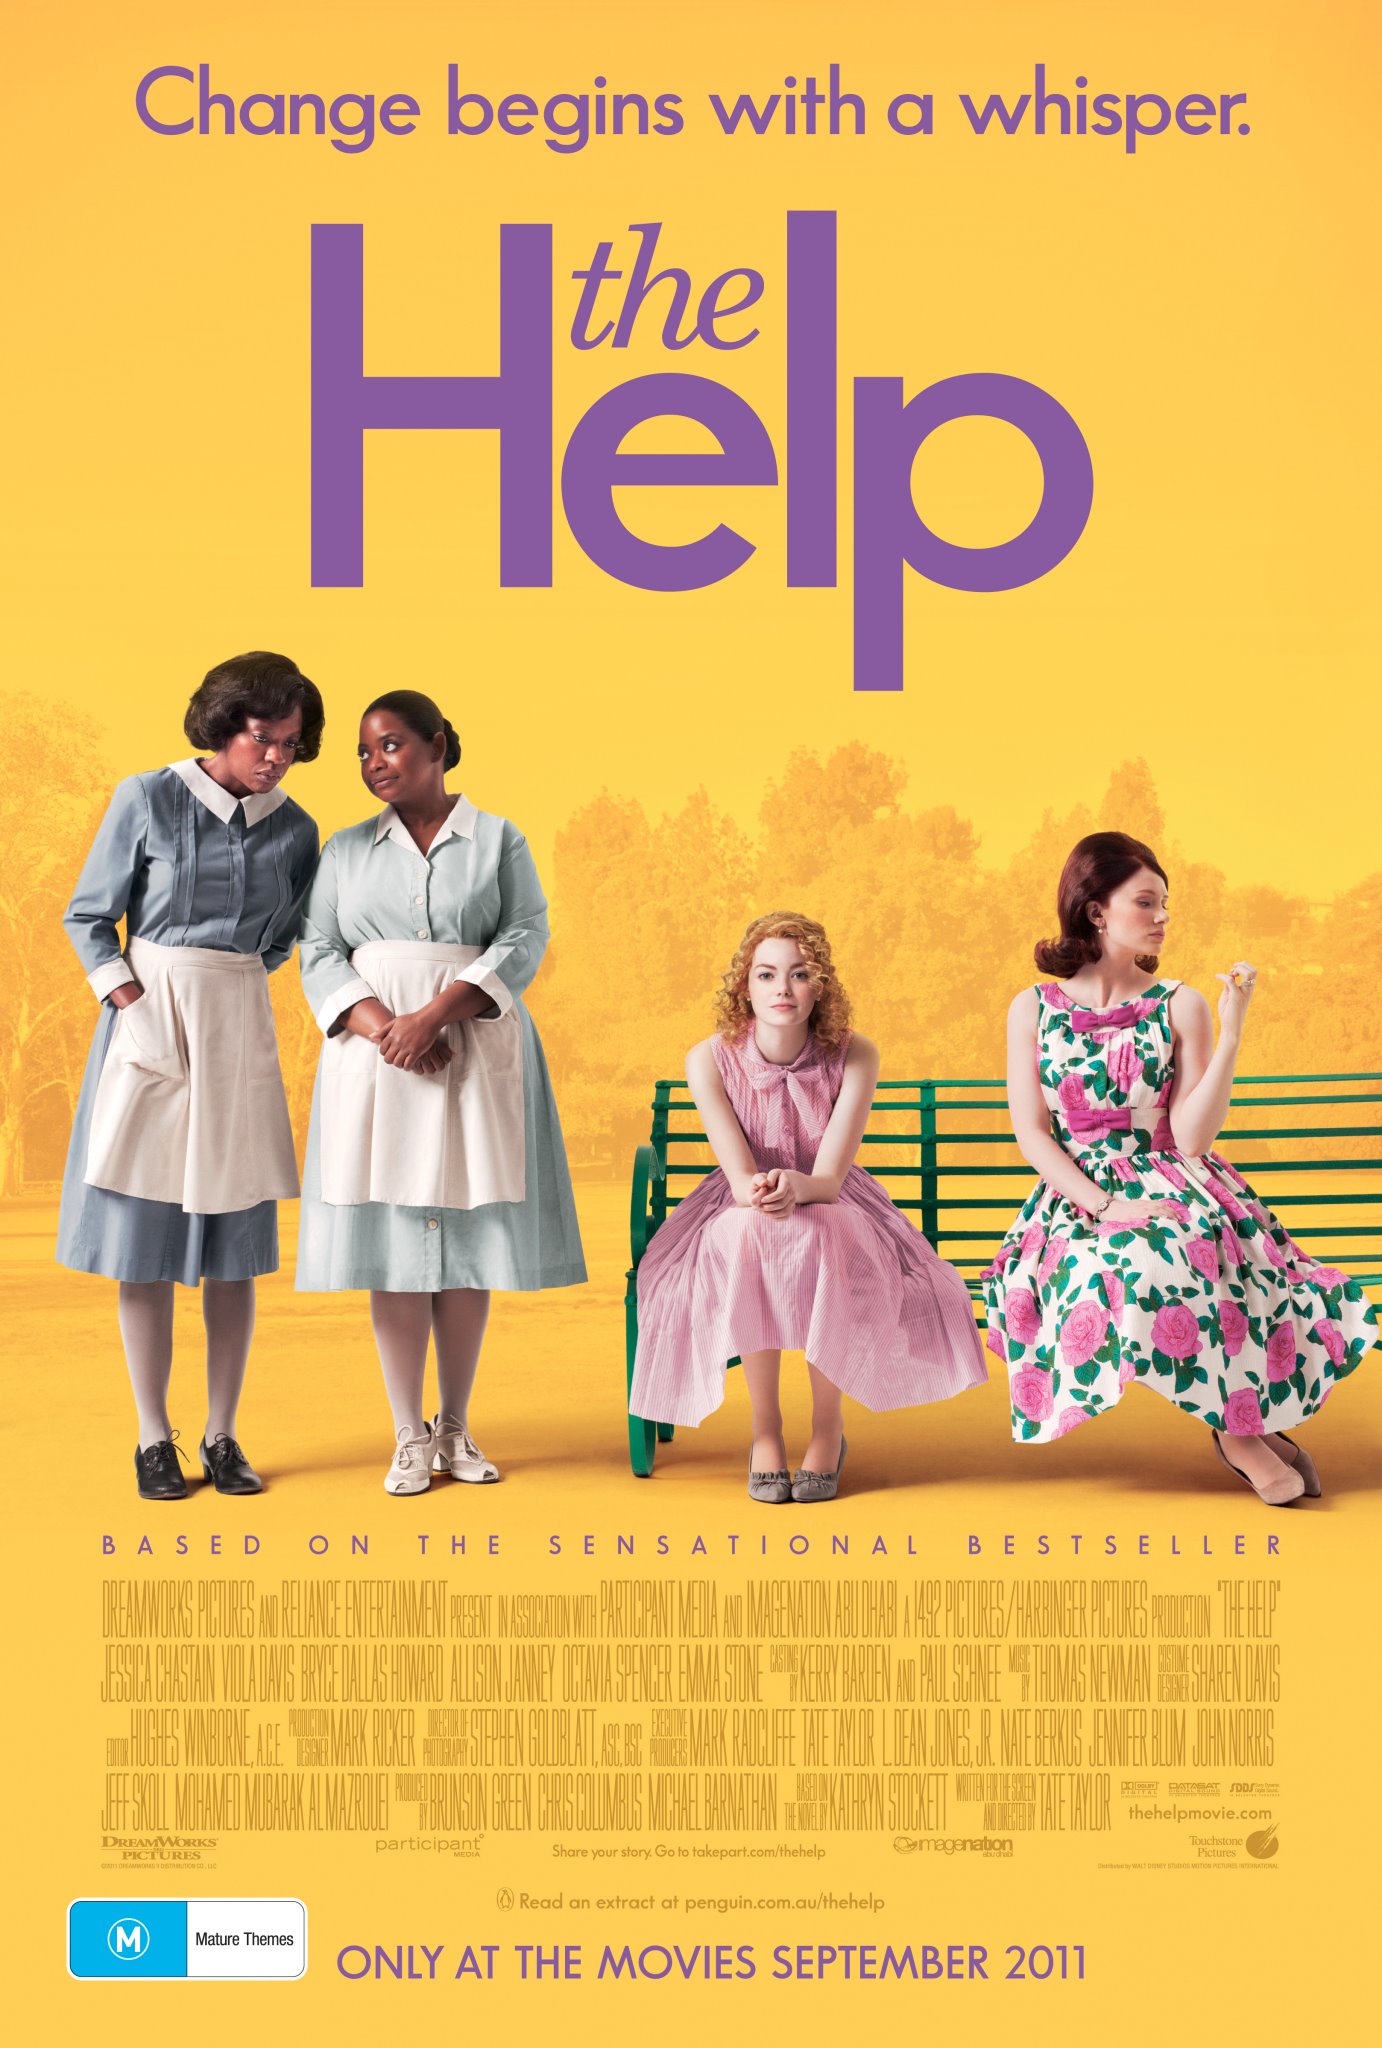 the help movie analysis sparknotes